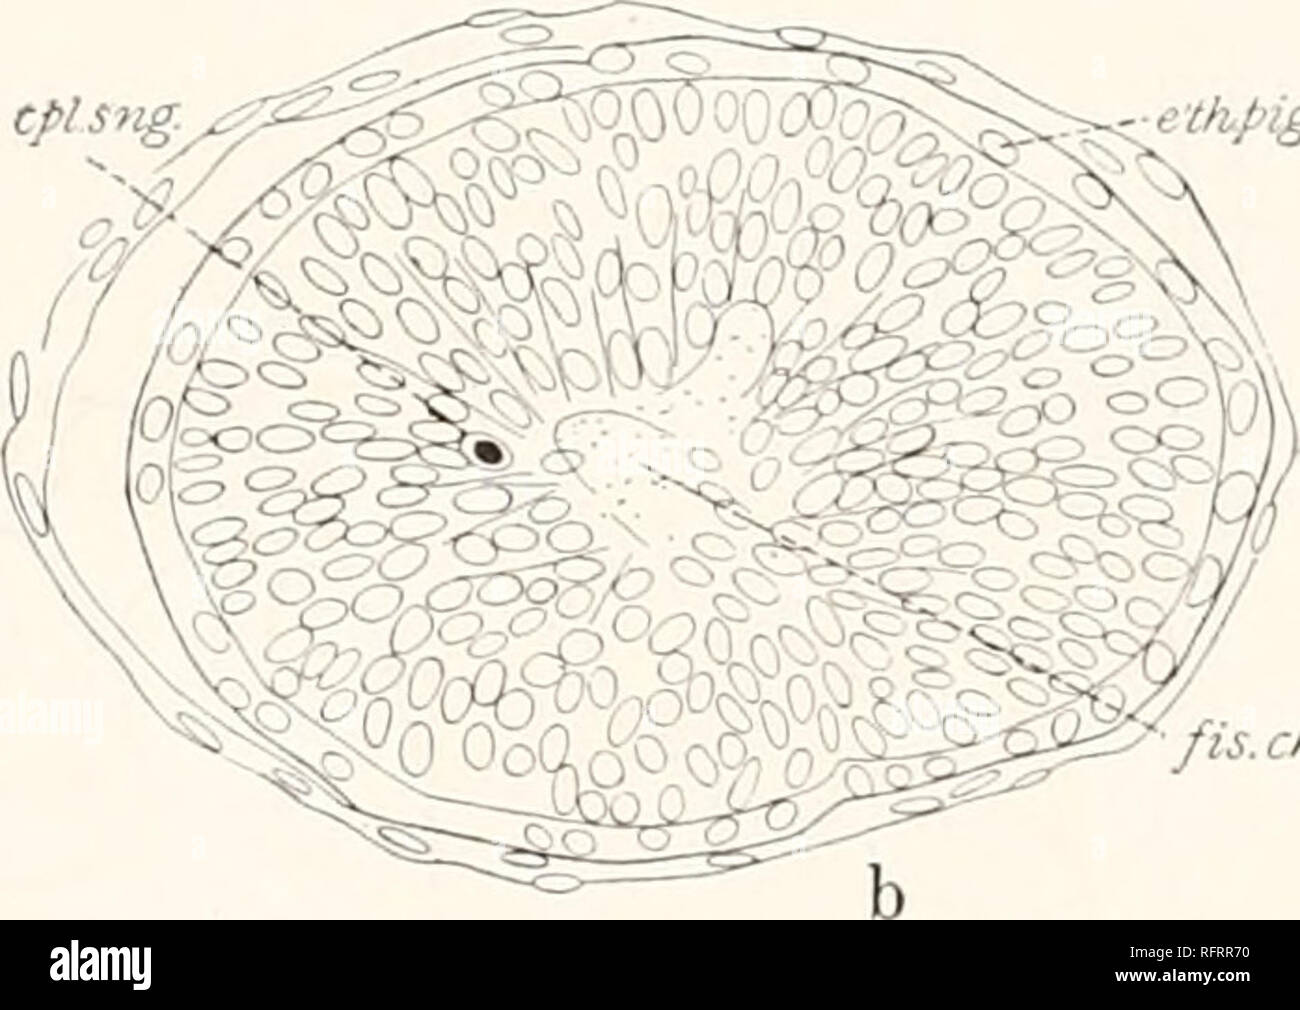 . Carnegie Institution of Washington publication. -e'tk.pig. '. fis. did. FH;. 61. Two Vertical Sections of Eye of Individual about 5 mm. long. Fig. a taken through Lens, Vitreous Cavity, and Choroid Fissure. Fig. 6, Second Section Proximal to that from which lig. 61 a was drawn and through Innermost Part of Vitreous Body. Layers of Retina have not yet hegun to be differentiated. It is differentiated into a nuclear layer (the outer and inner together) and the .nanglionic layer, separated by the incomplete inner reticular layer. The ganglionic layer is composed of two sorts of cells. Those near Stock Photo